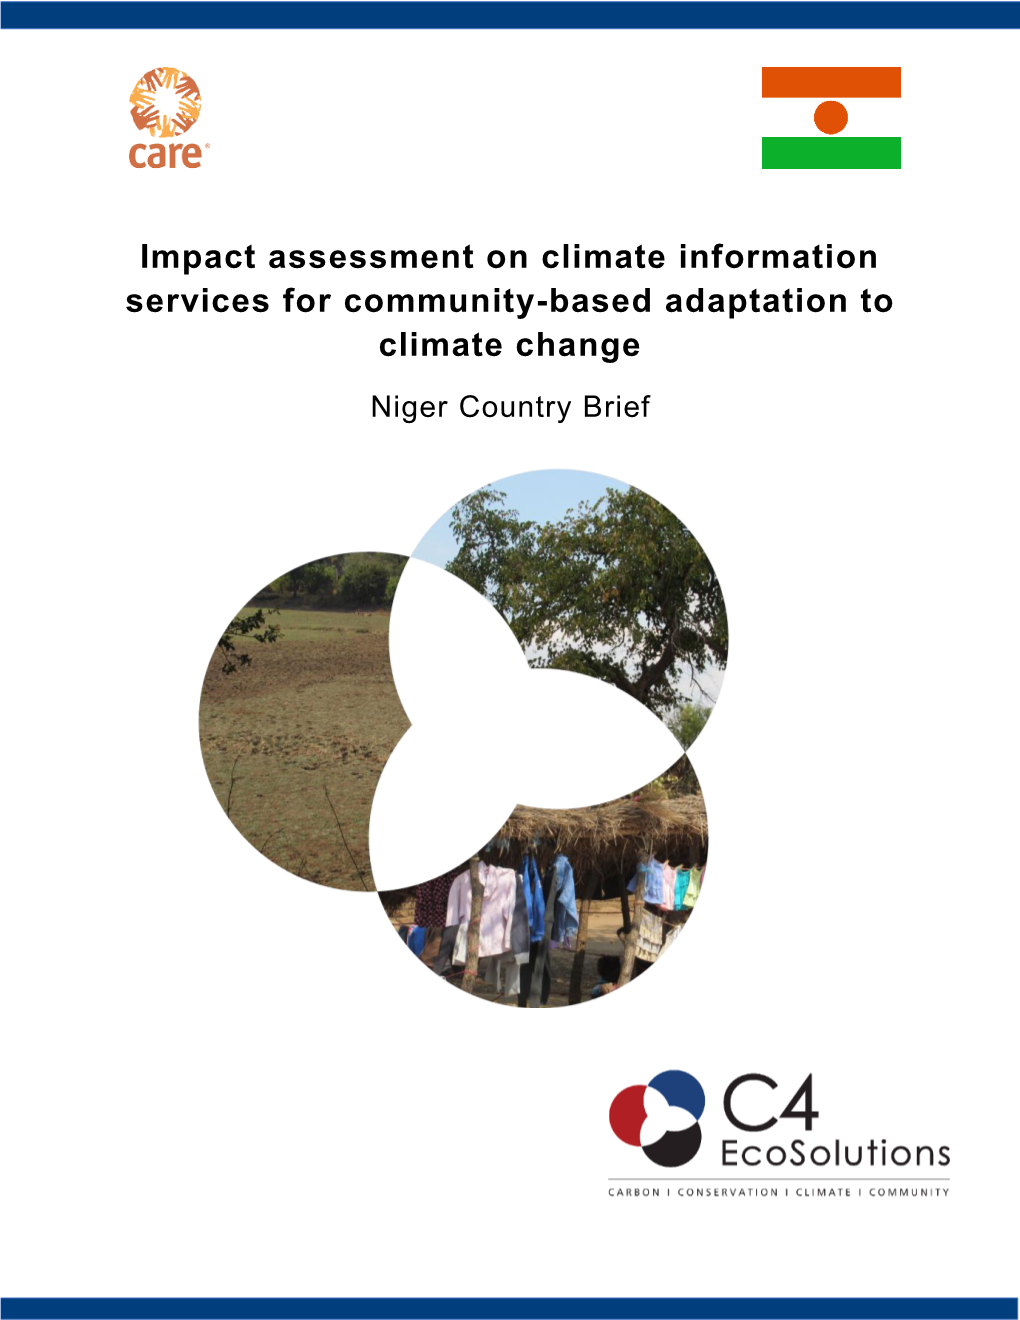 Impact Assessment on Climate Information Services for Community-Based Adaptation to Climate Change